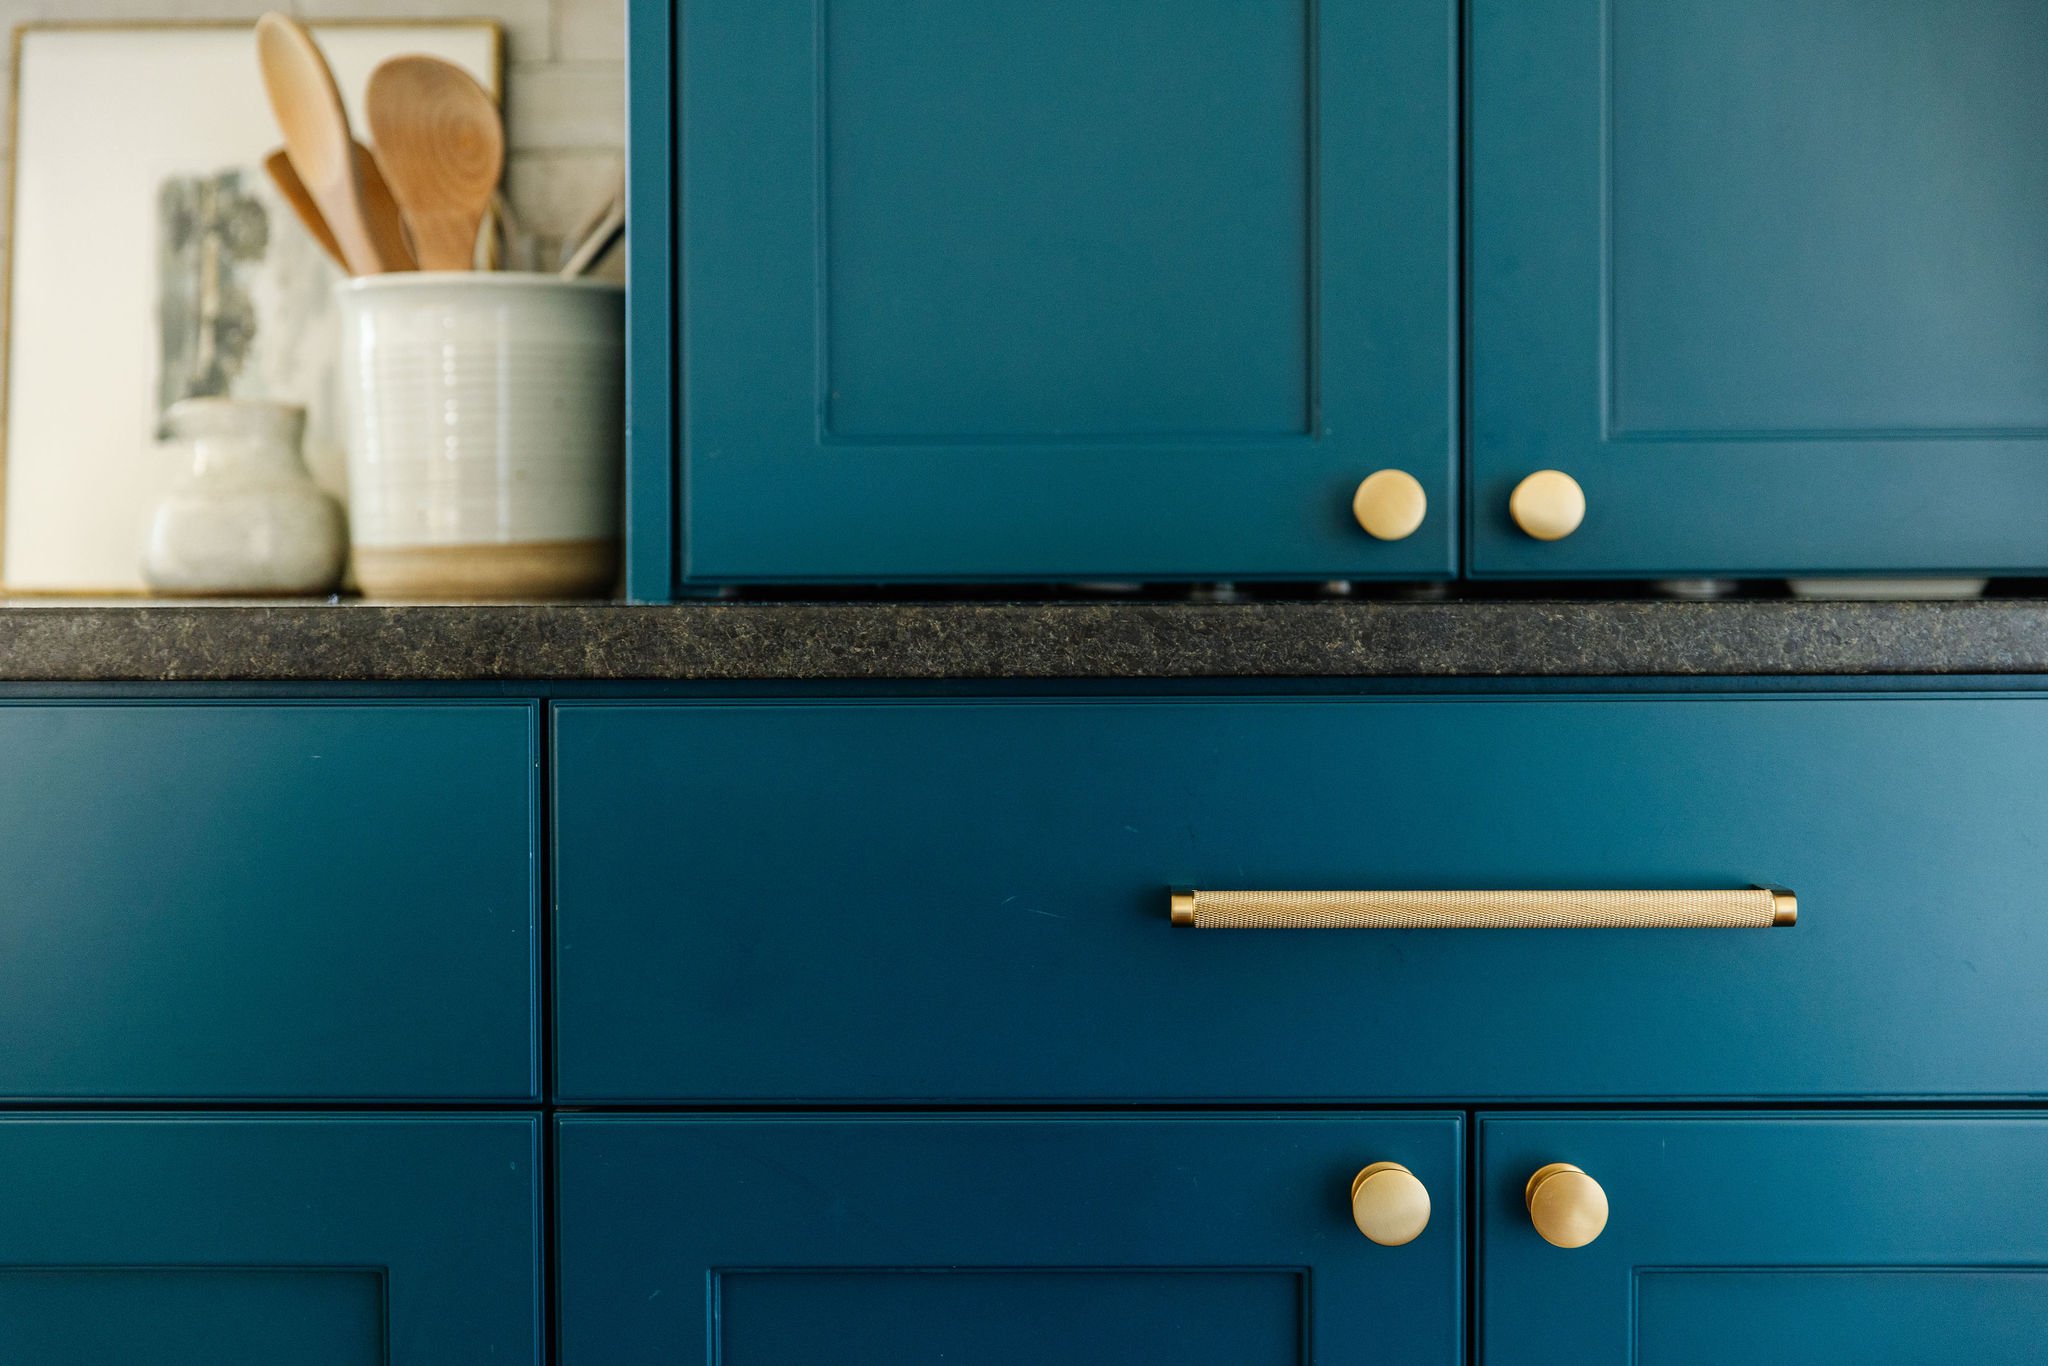  This detail-focused photo shows the texture of the drawer handle and the smooth texture of the cabinets.Golden cabinet handles dark gray countertop extra long drawer pulls #detailshot #closeupdetail #goldhandles #darkcountertop&nbsp; 